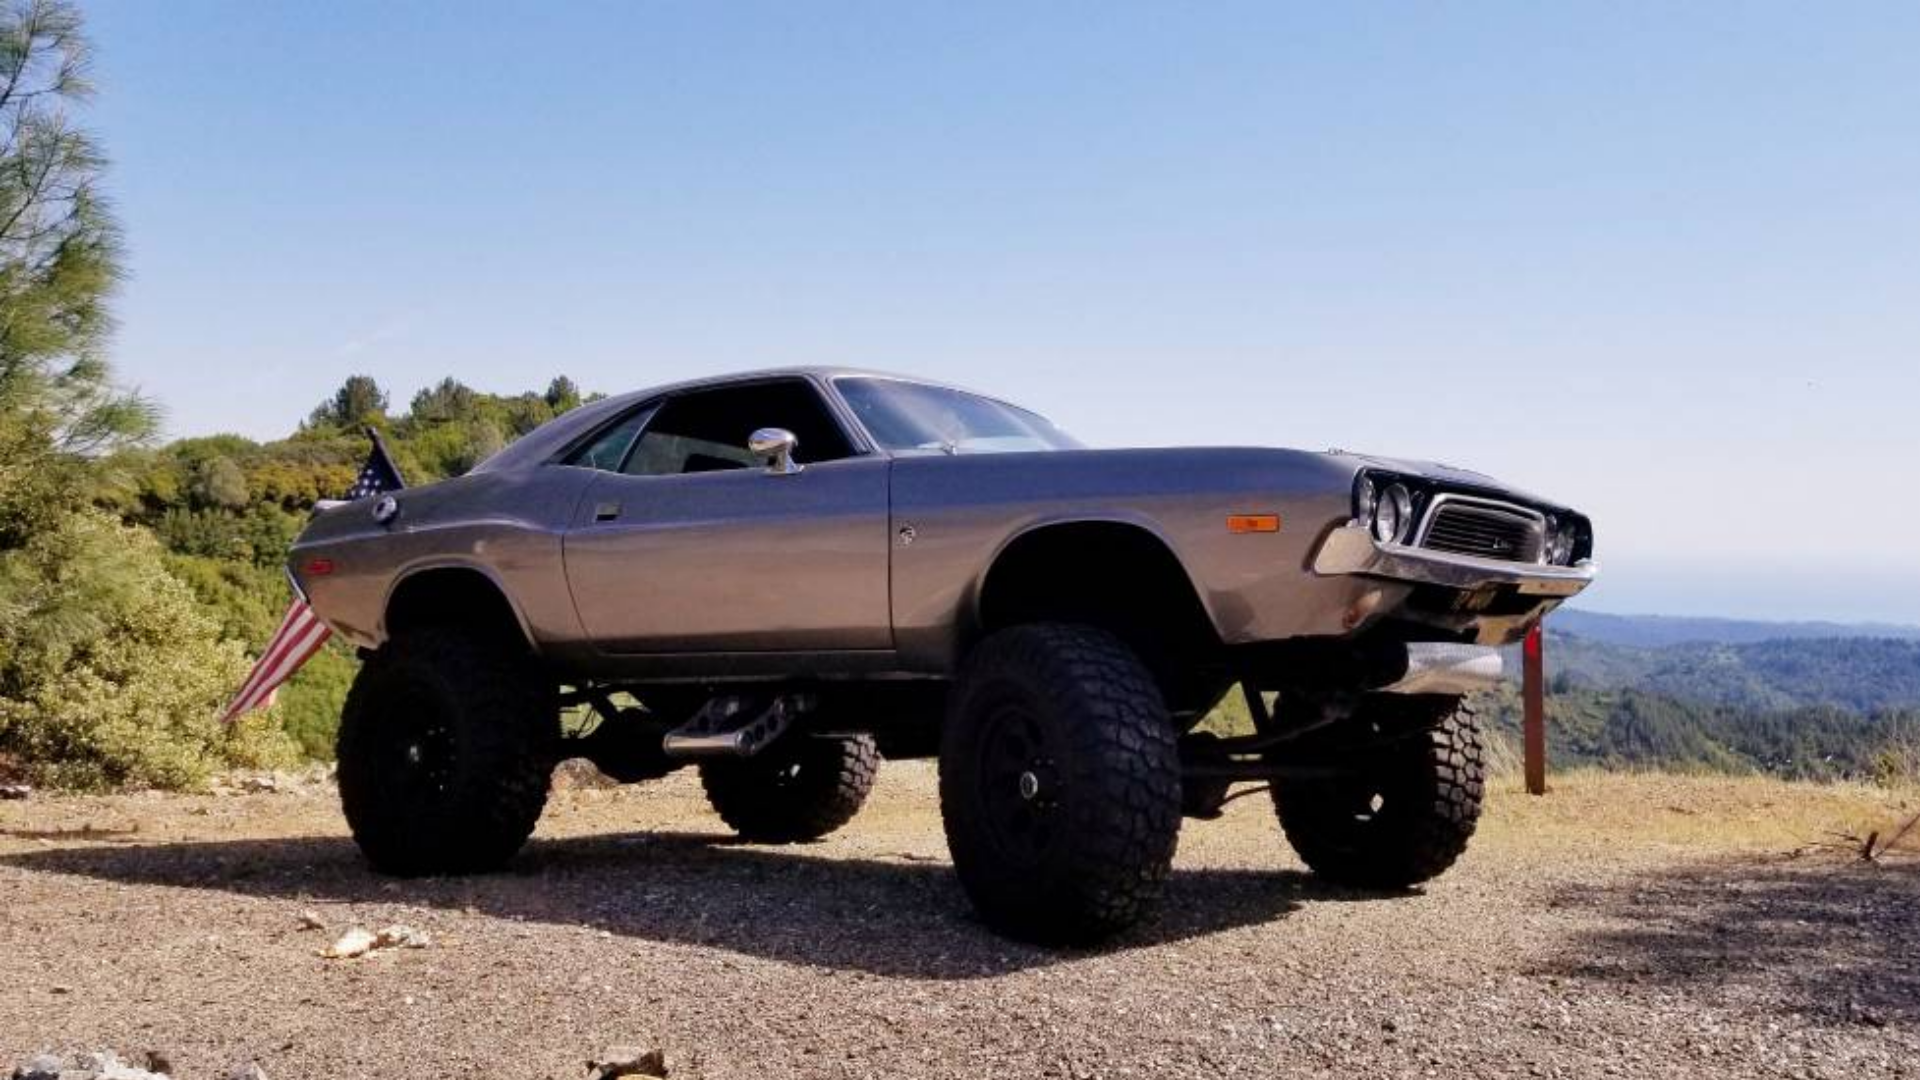 For Sale: Battle-Ready 1973 Dodge Challenger on a Military Truck Chassis